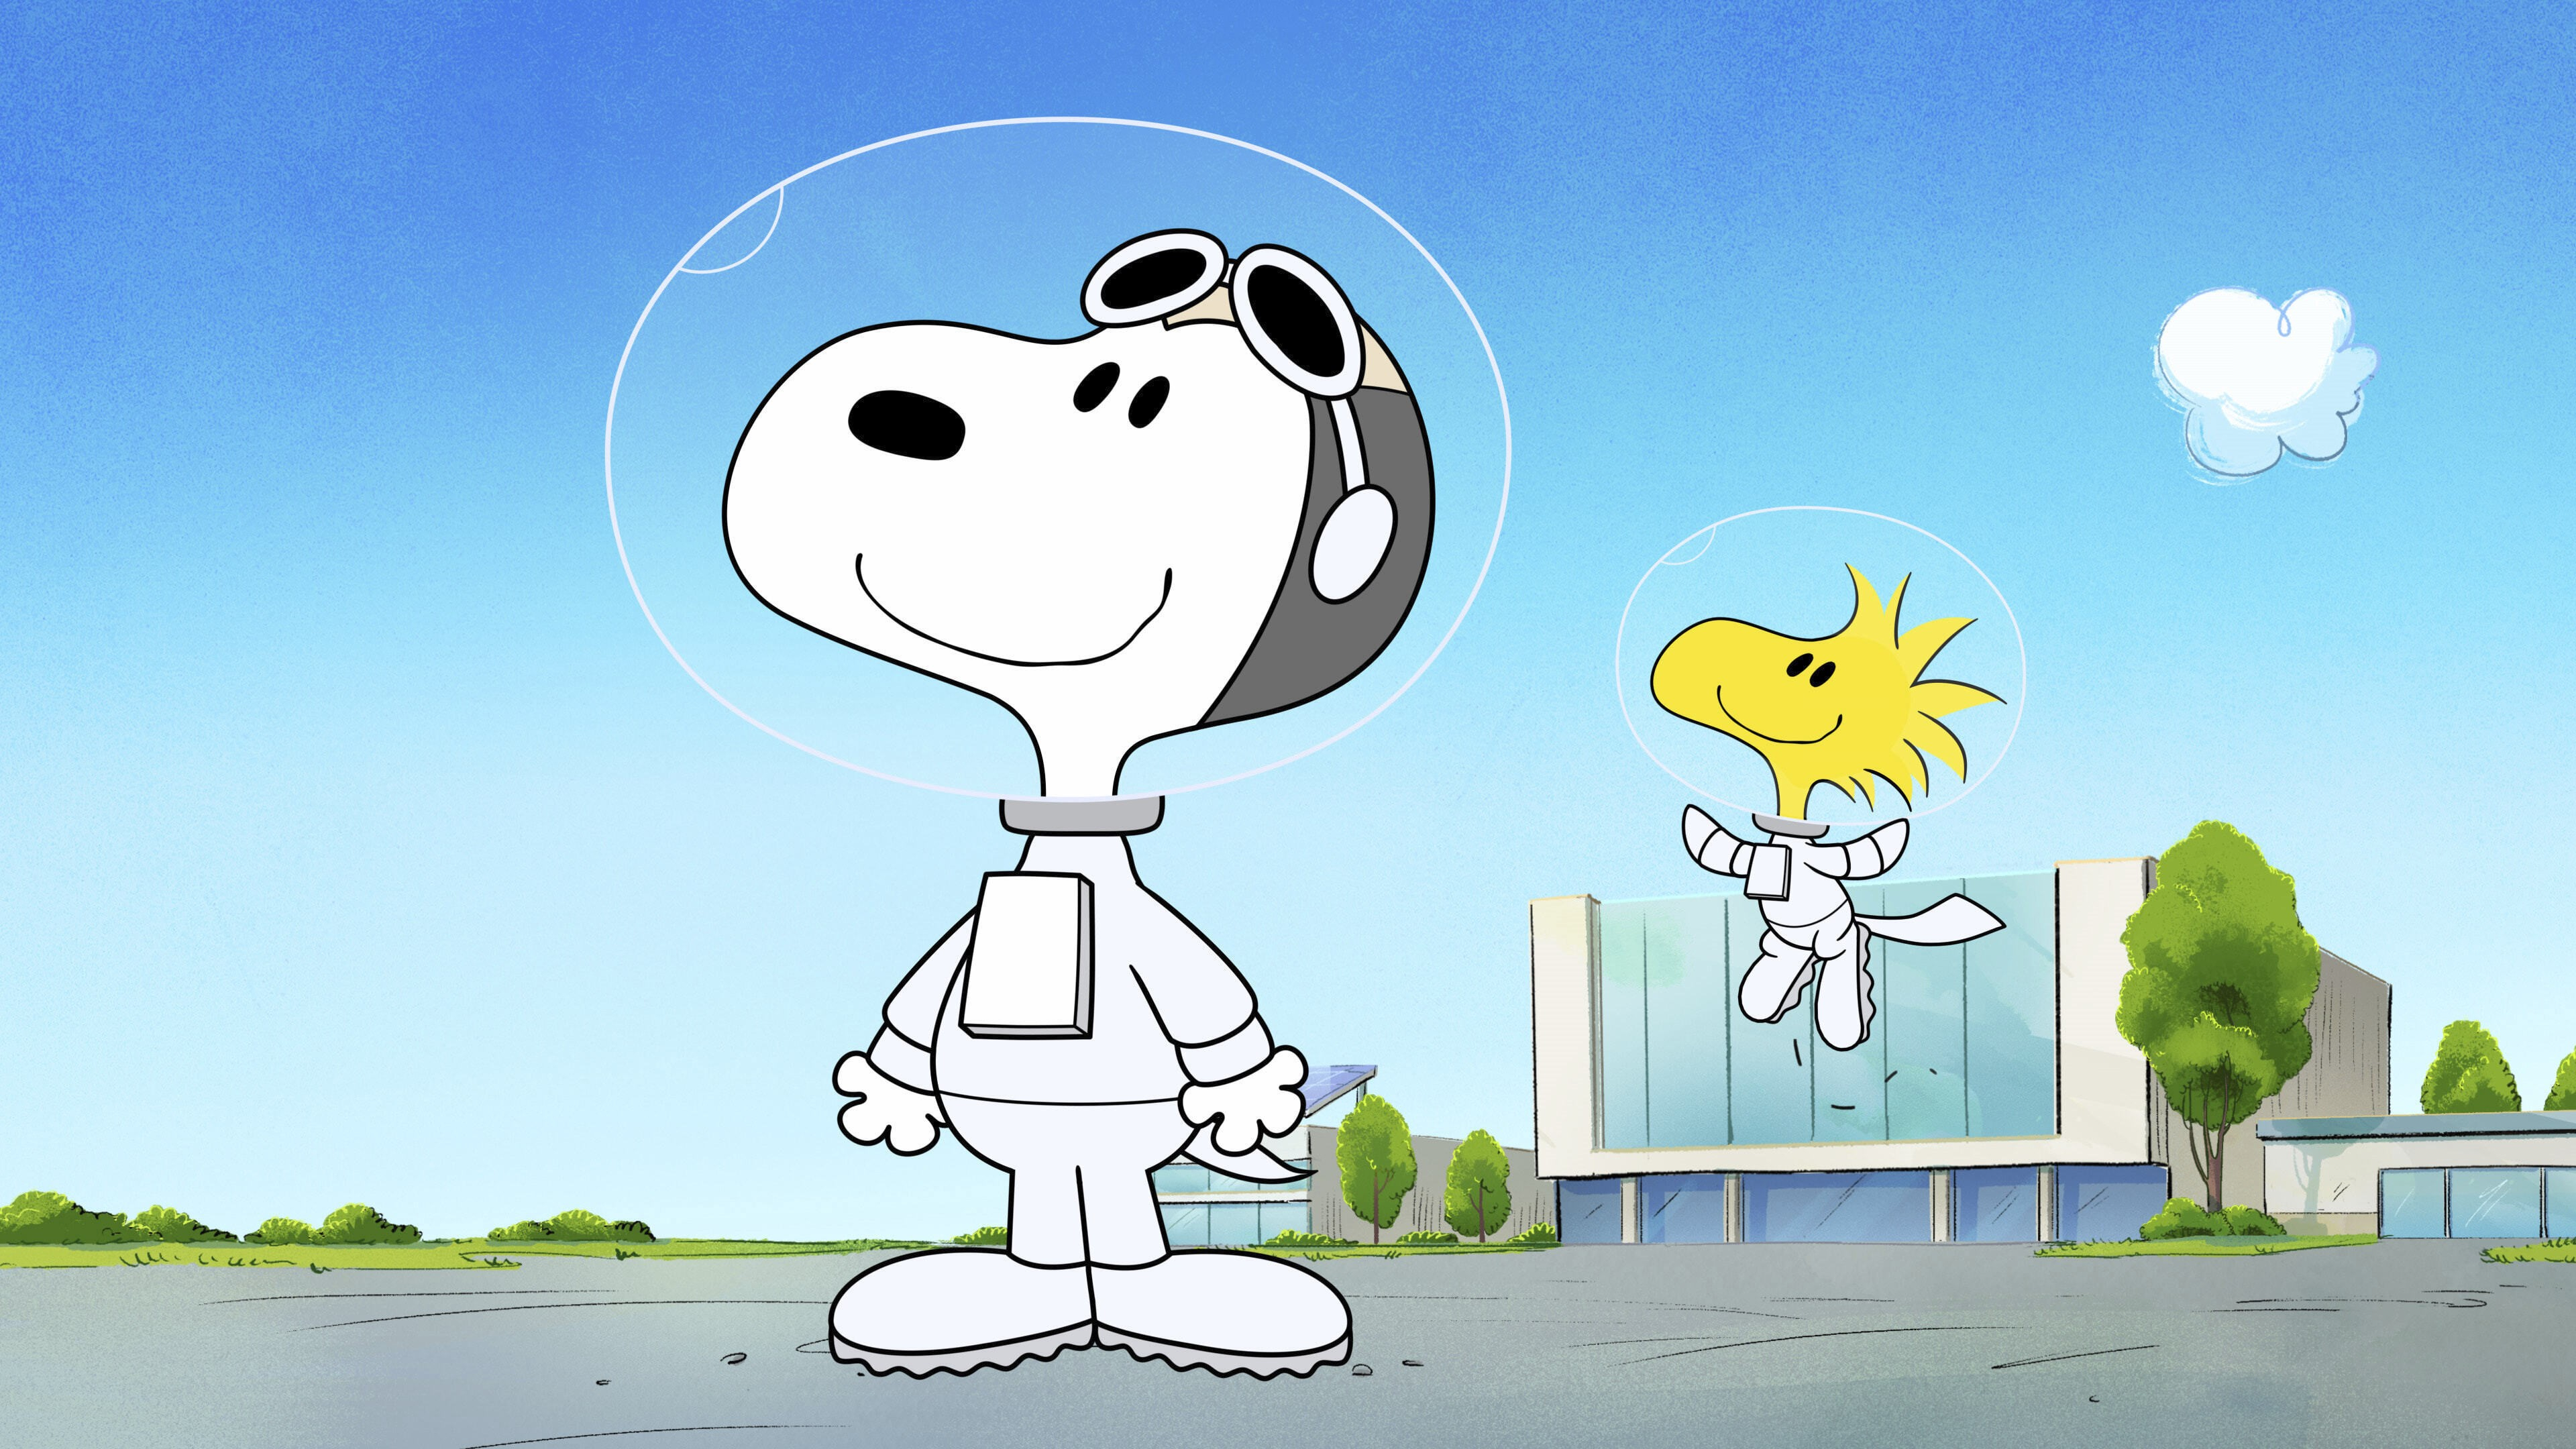 3840x2160 The cosmos beckons for Snoopy onscreen and in real life